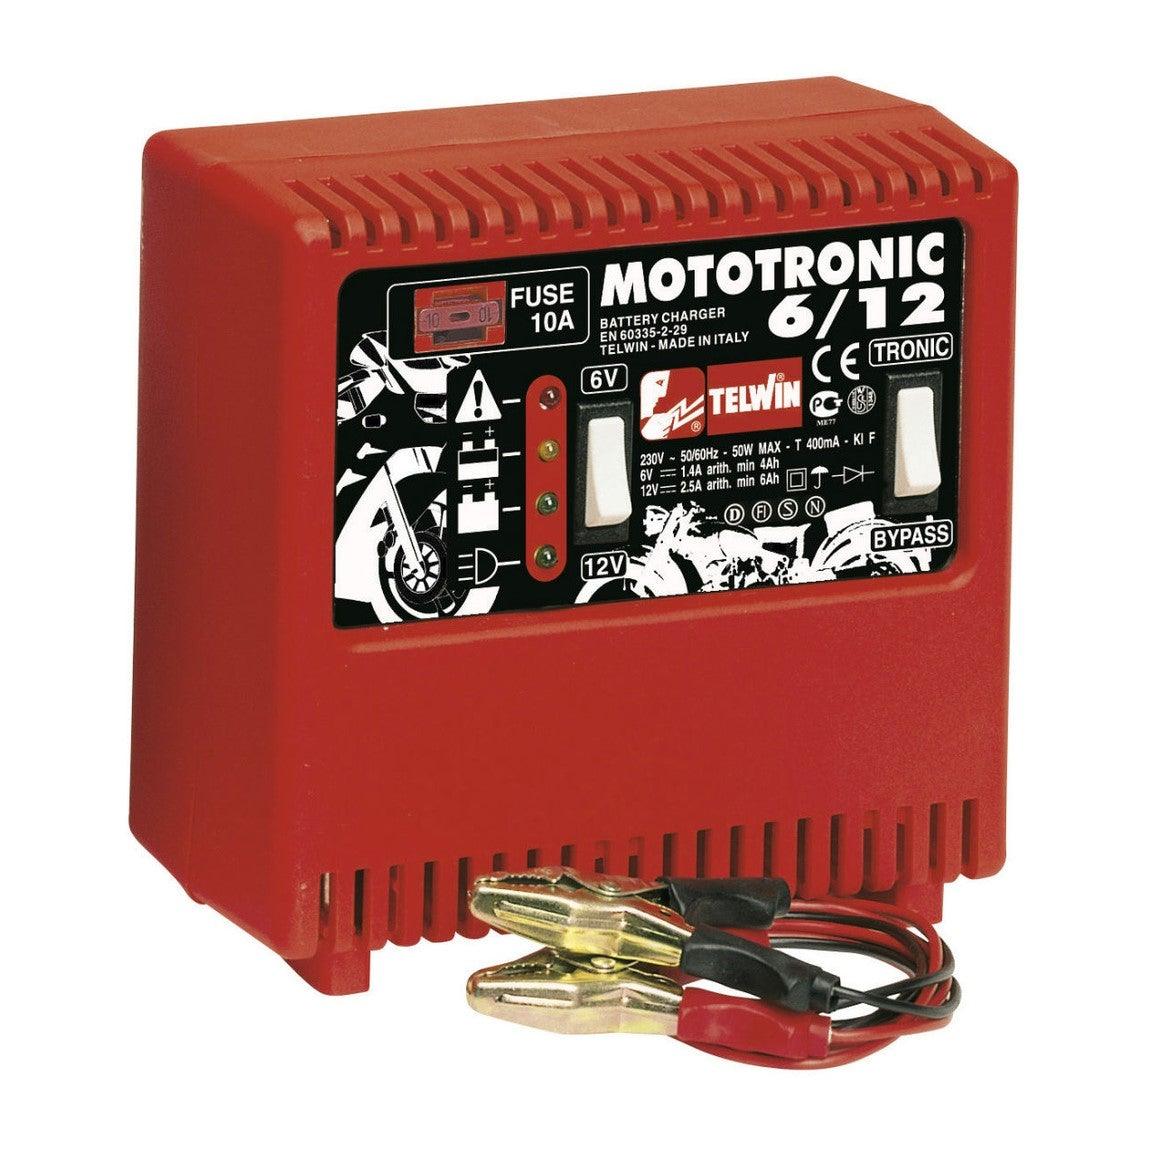 Trading 6-12: Charger Mototronic Takla Battery —